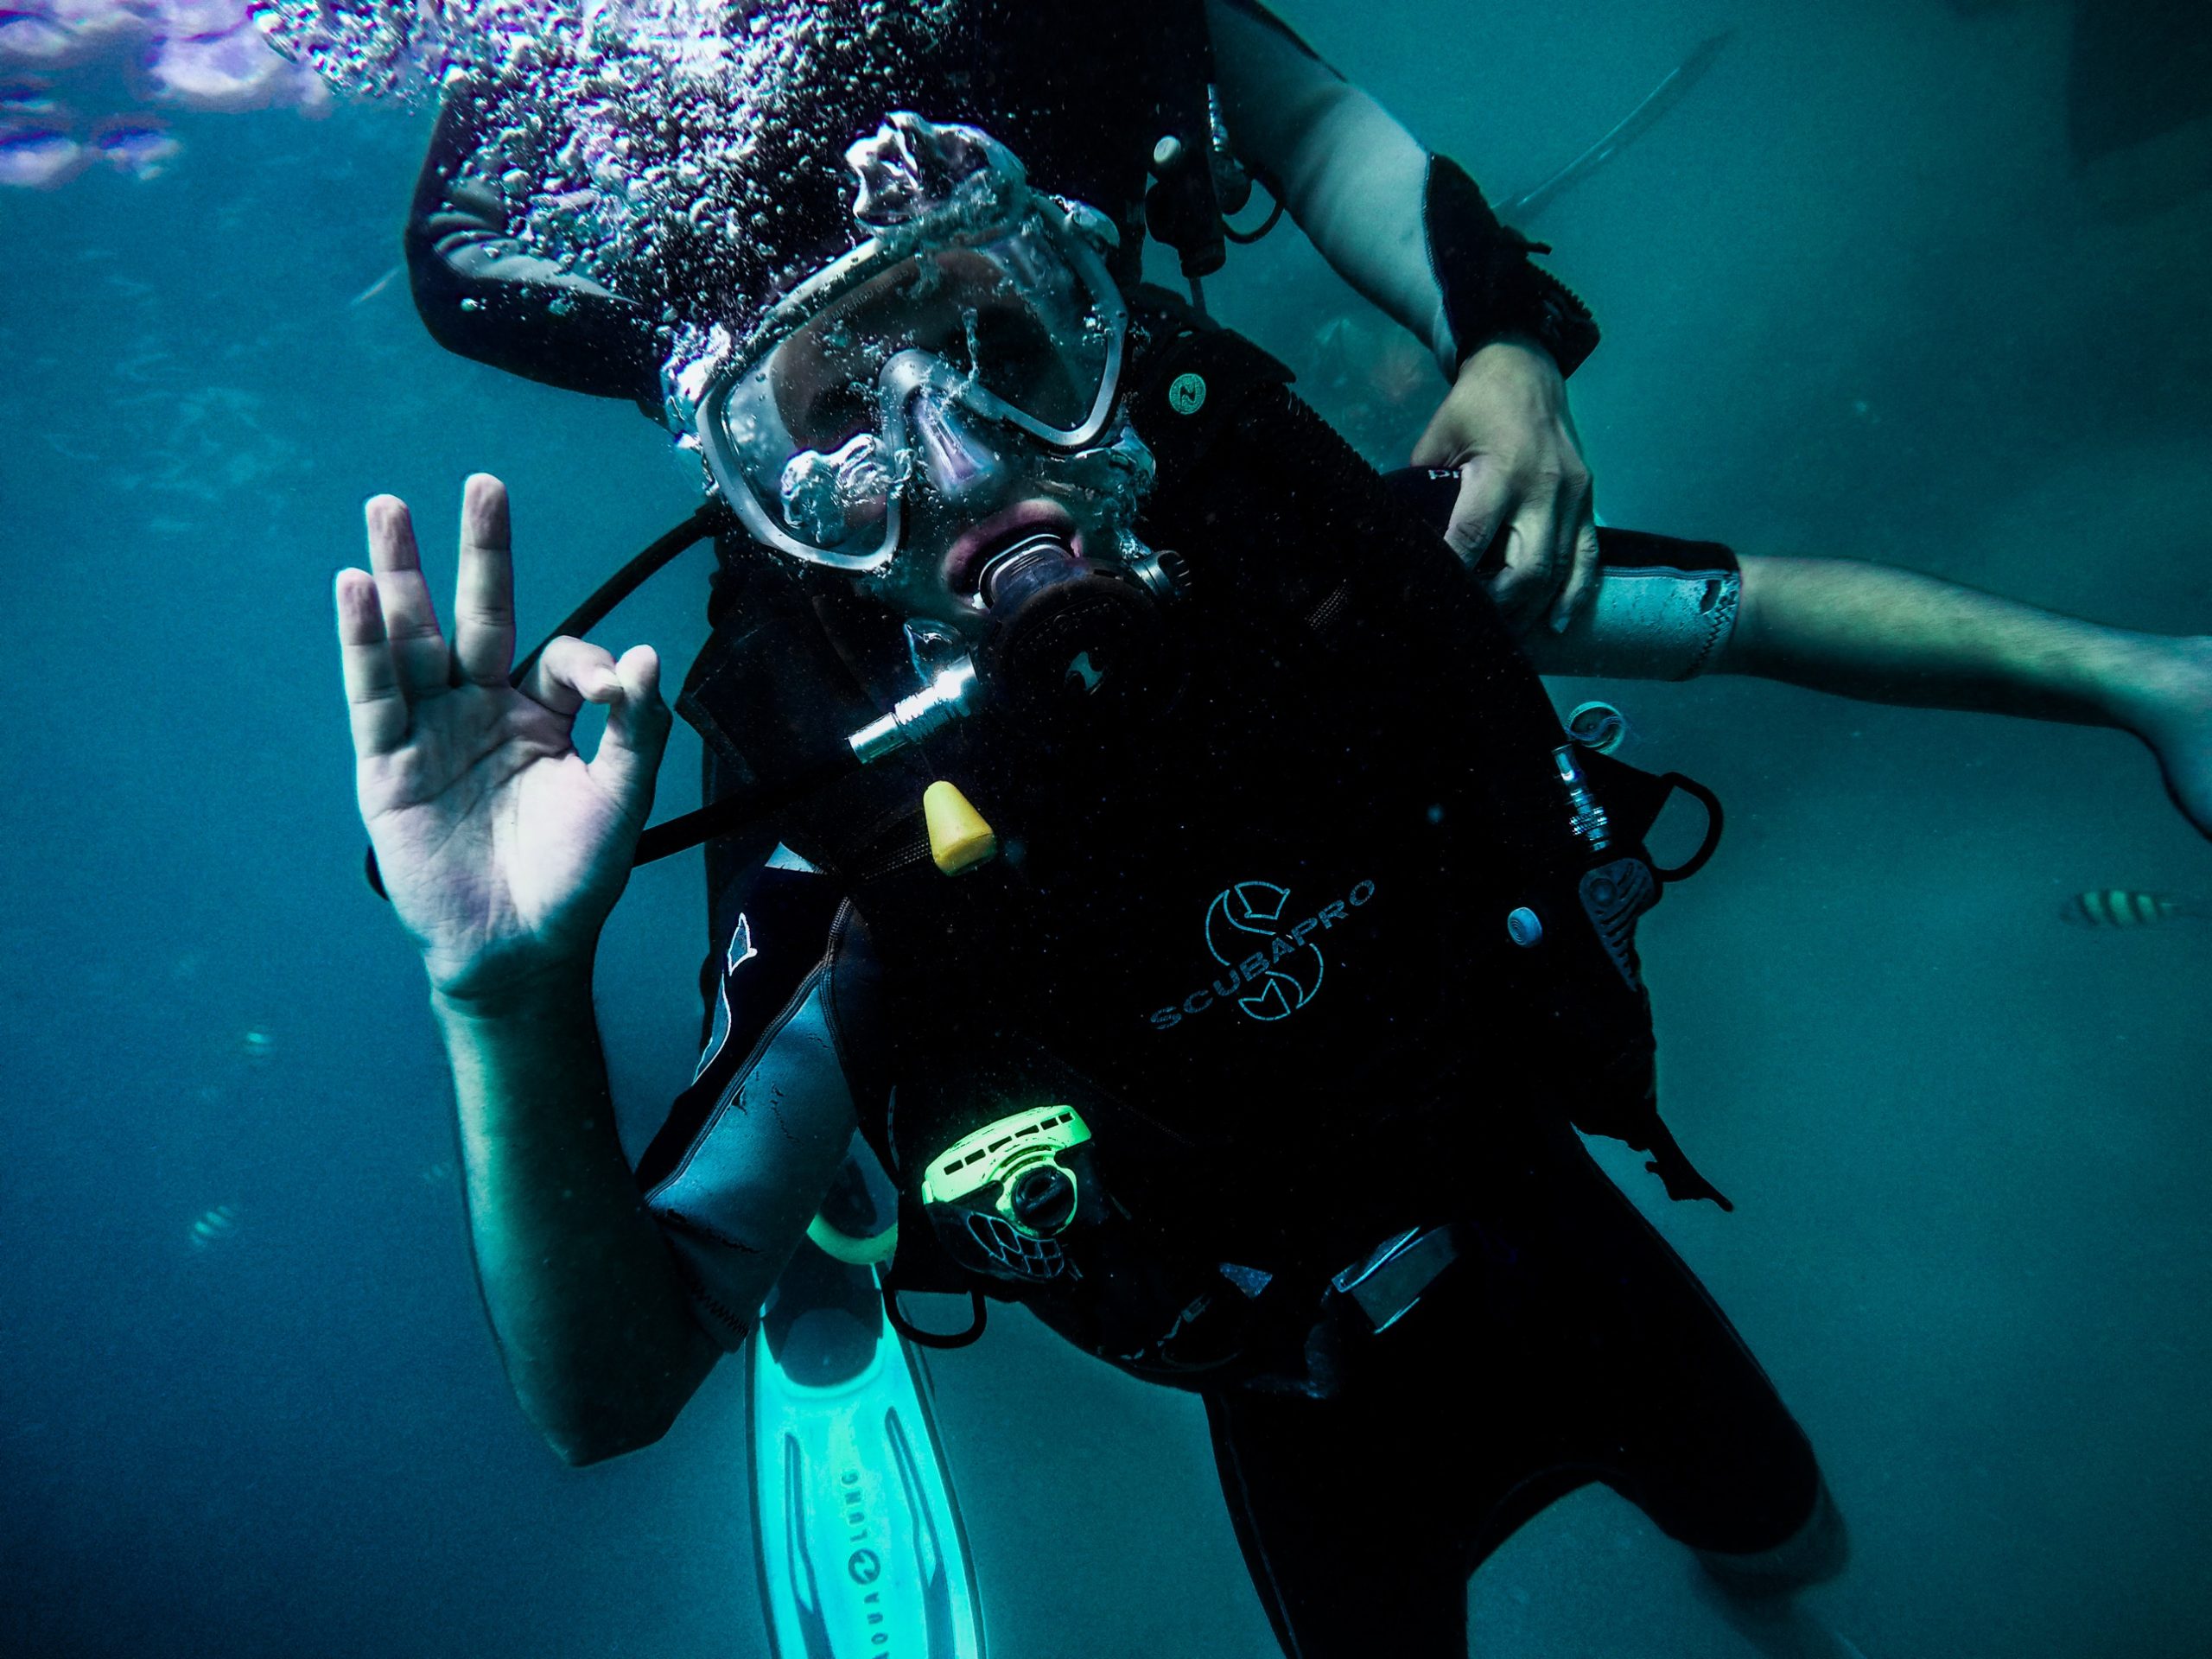 How to get scuba certified